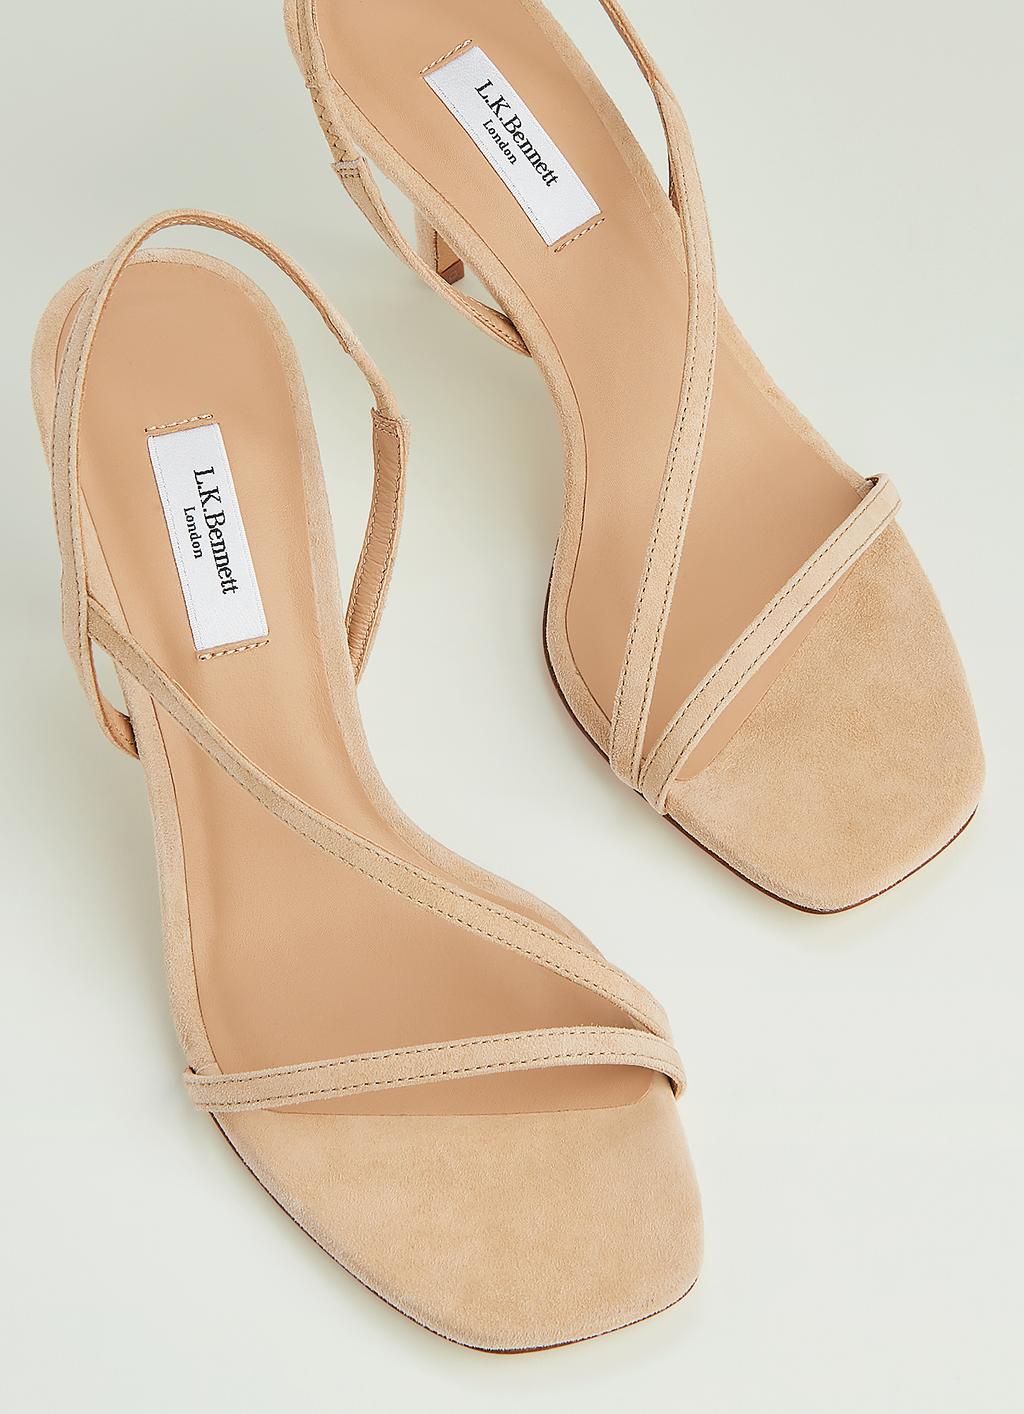 Neave Beige Suede Strappy Sandals | Shoes | L.K.Bennett